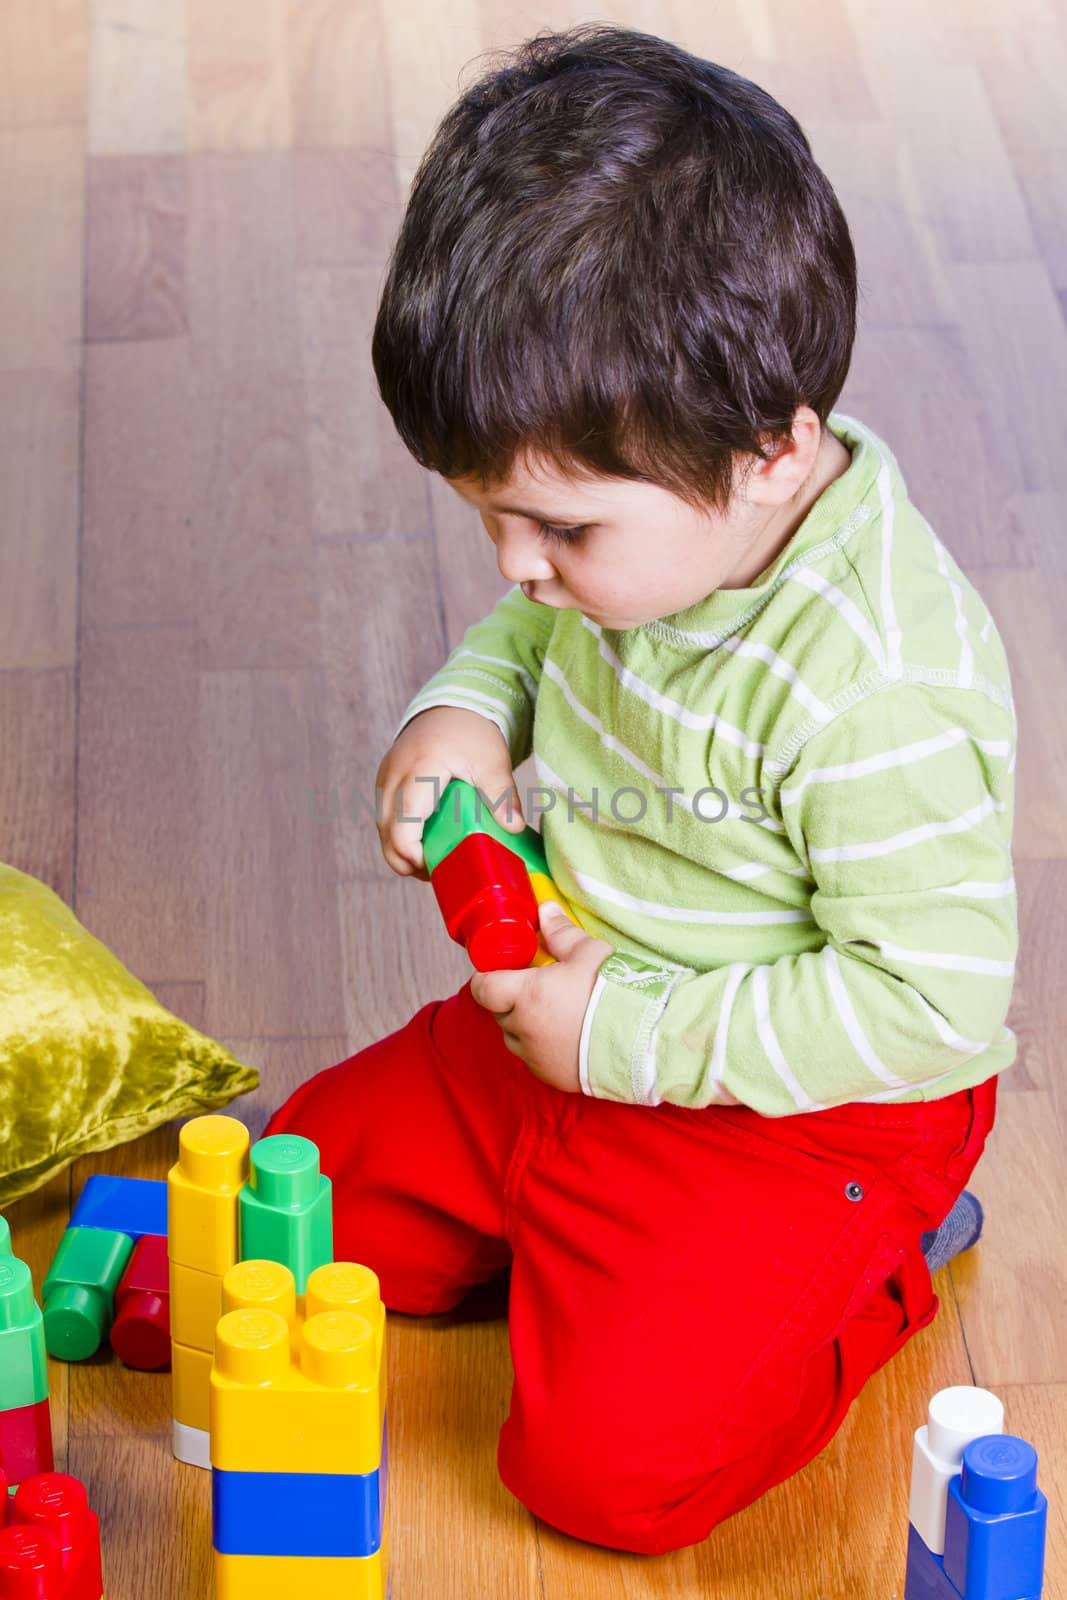 A happy little boy is building a colorful toy block tower by FernandoCortes